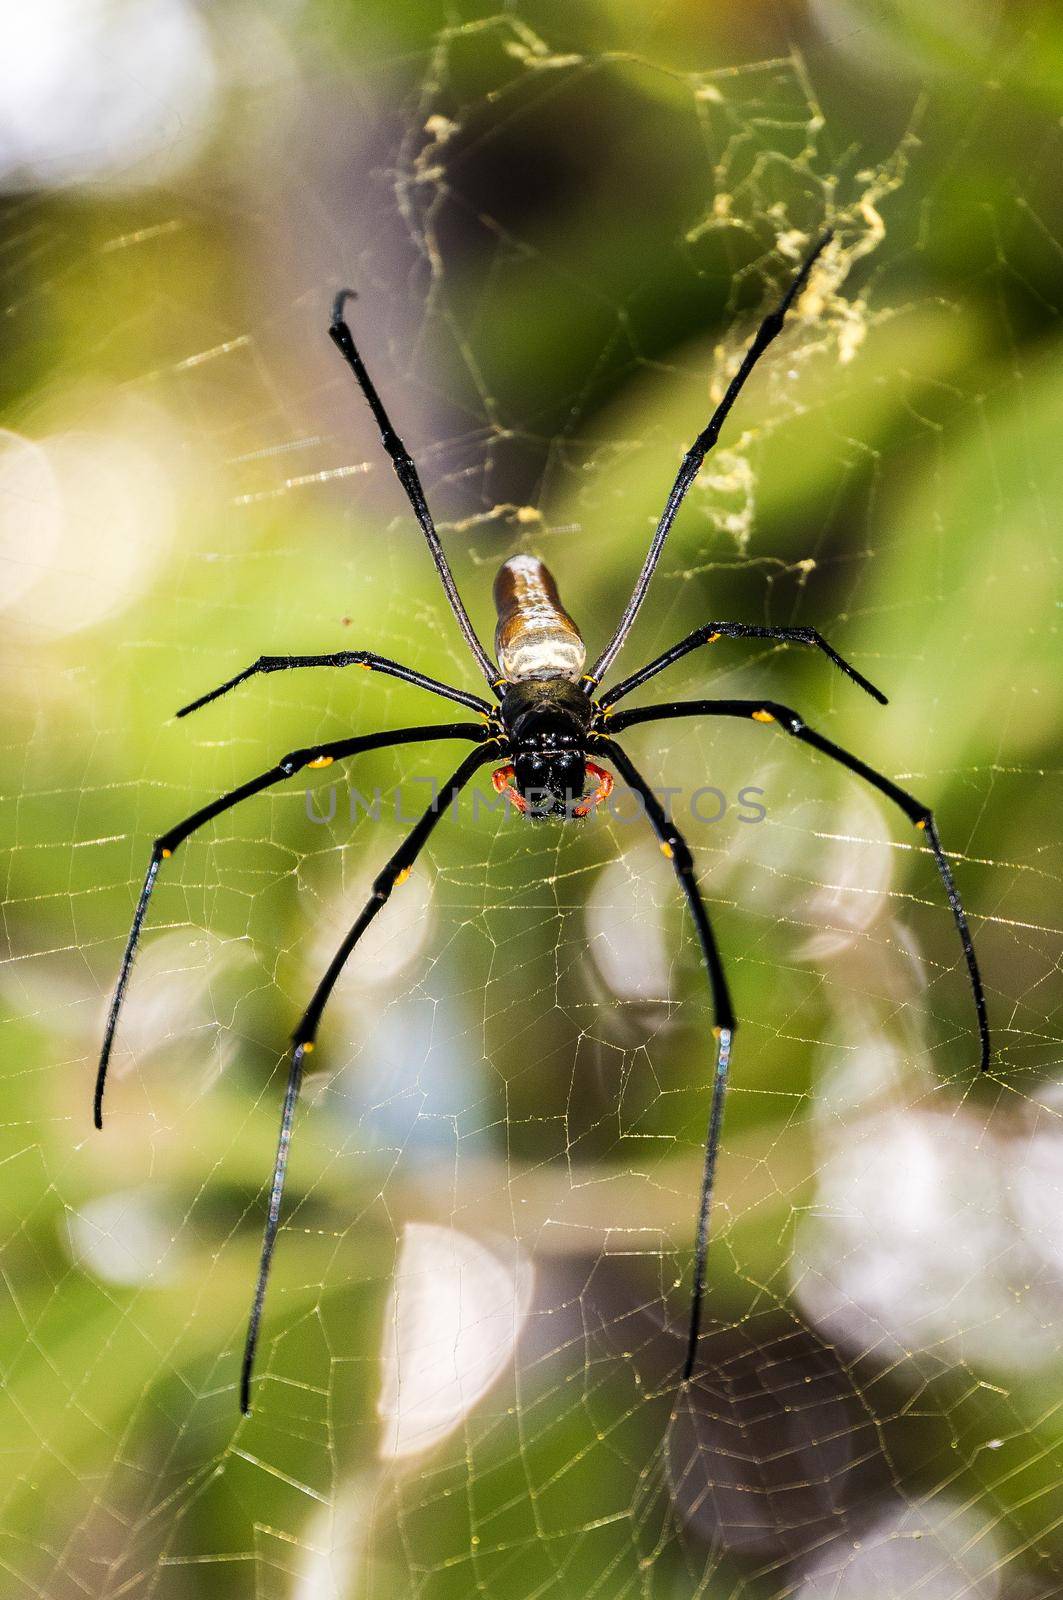 A large northern golden orb weaver or giant golden orb weaver spider Nephila pilipes typically found in Asia and Australia, lichtfield national park by bettercallcurry